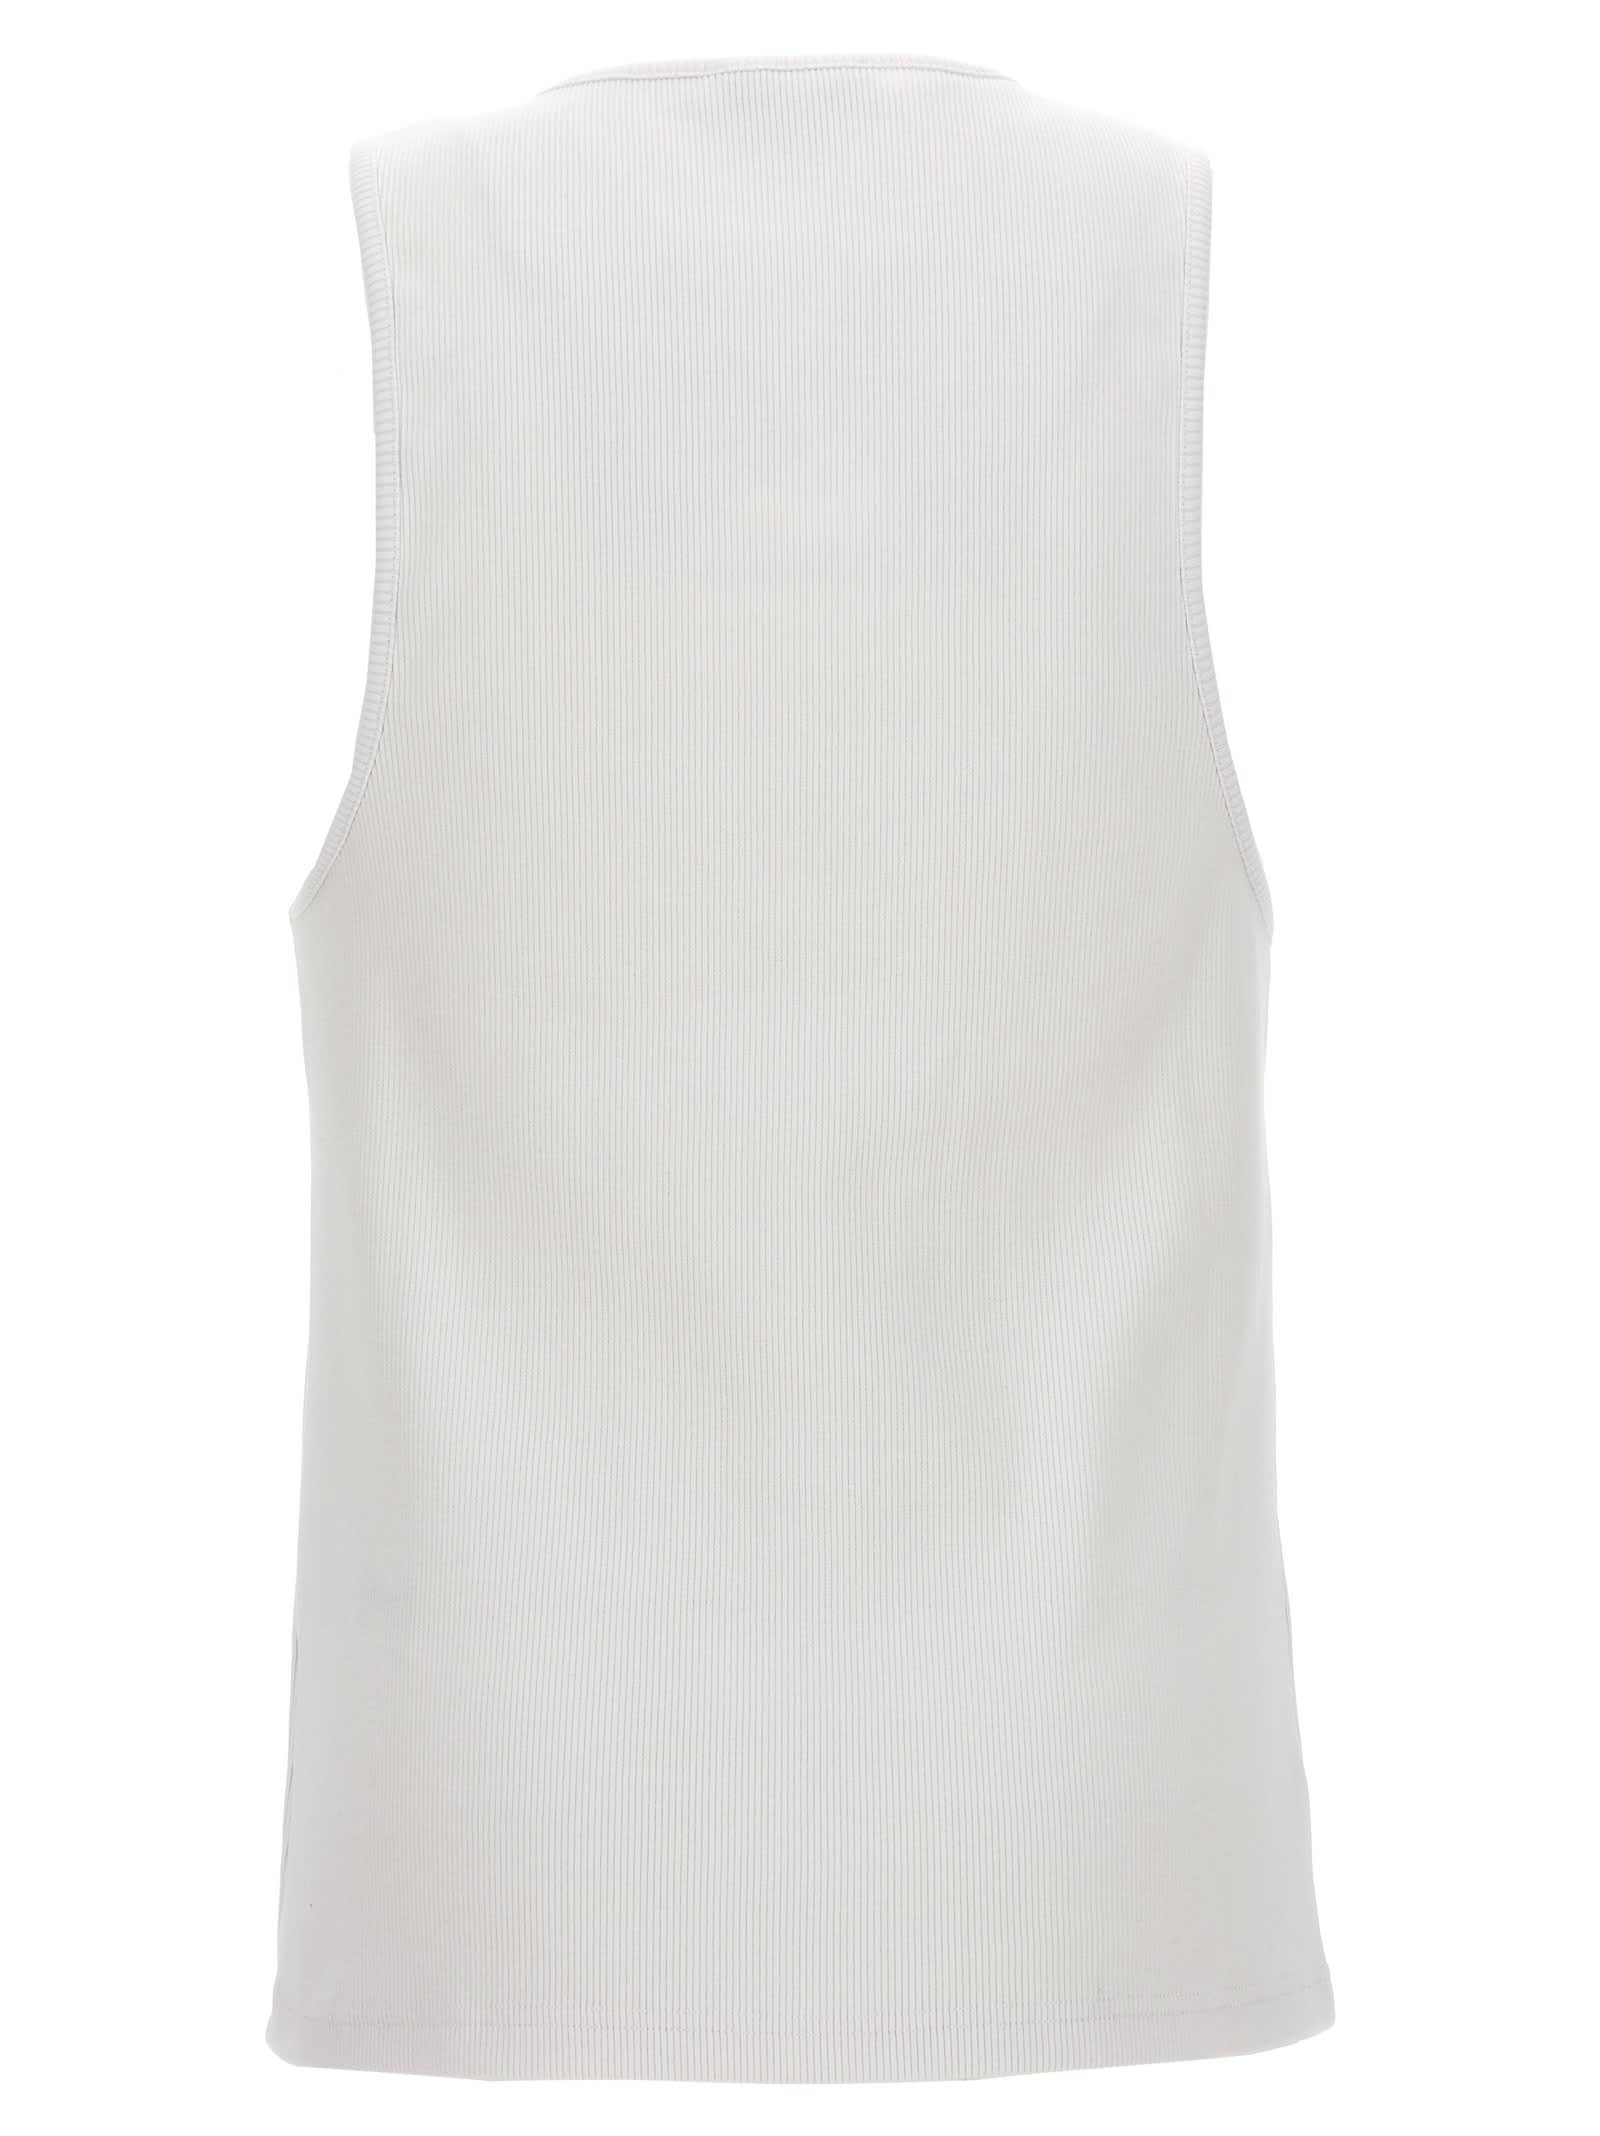 Shop Jw Anderson Anchor Top In White